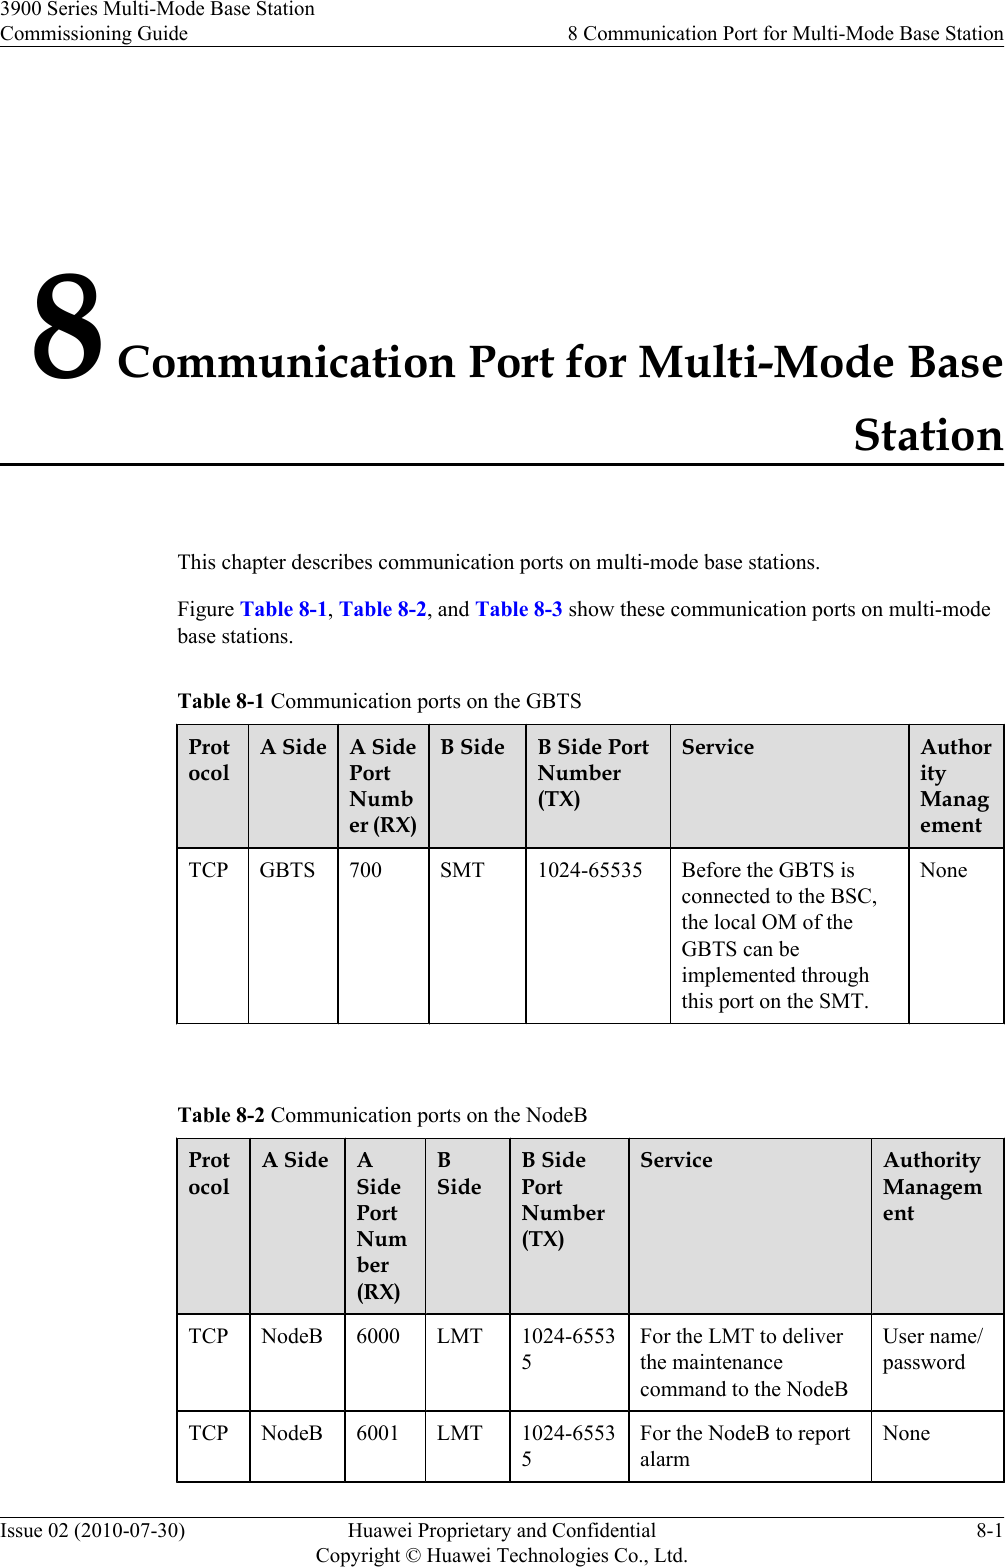 8 Communication Port for Multi-Mode BaseStationThis chapter describes communication ports on multi-mode base stations.Figure Table 8-1, Table 8-2, and Table 8-3 show these communication ports on multi-modebase stations.Table 8-1 Communication ports on the GBTSProtocolA Side A SidePortNumber (RX)B Side B Side PortNumber(TX)Service AuthorityManagementTCP GBTS 700 SMT 1024-65535 Before the GBTS isconnected to the BSC,the local OM of theGBTS can beimplemented throughthis port on the SMT.None Table 8-2 Communication ports on the NodeBProtocolA Side ASidePortNumber(RX)BSideB SidePortNumber(TX)Service AuthorityManagementTCP NodeB 6000 LMT 1024-65535For the LMT to deliverthe maintenancecommand to the NodeBUser name/passwordTCP NodeB 6001 LMT 1024-65535For the NodeB to reportalarmNone3900 Series Multi-Mode Base StationCommissioning Guide 8 Communication Port for Multi-Mode Base StationIssue 02 (2010-07-30) Huawei Proprietary and ConfidentialCopyright © Huawei Technologies Co., Ltd.8-1